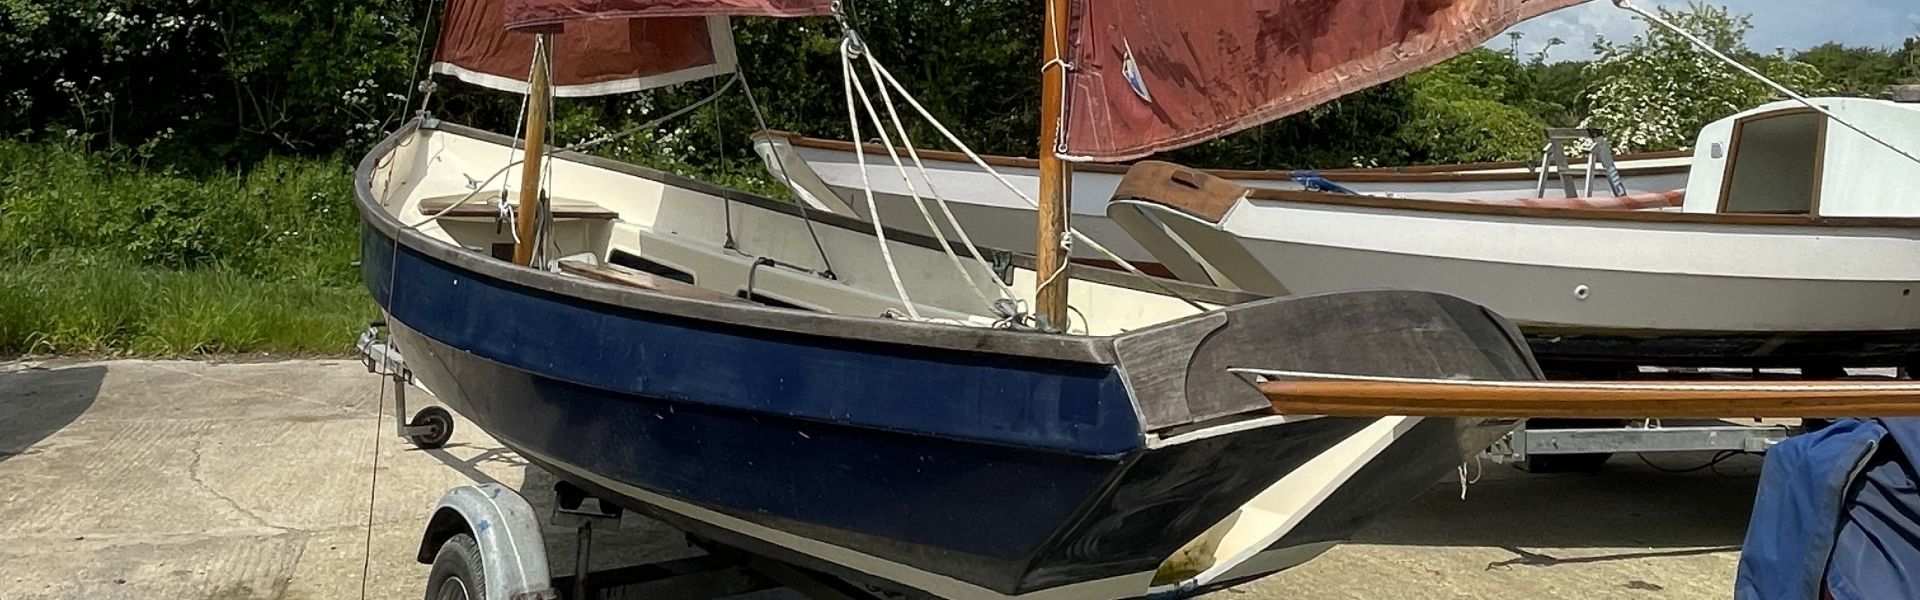 Drascombe Lugger McNulty 026 Year 1999